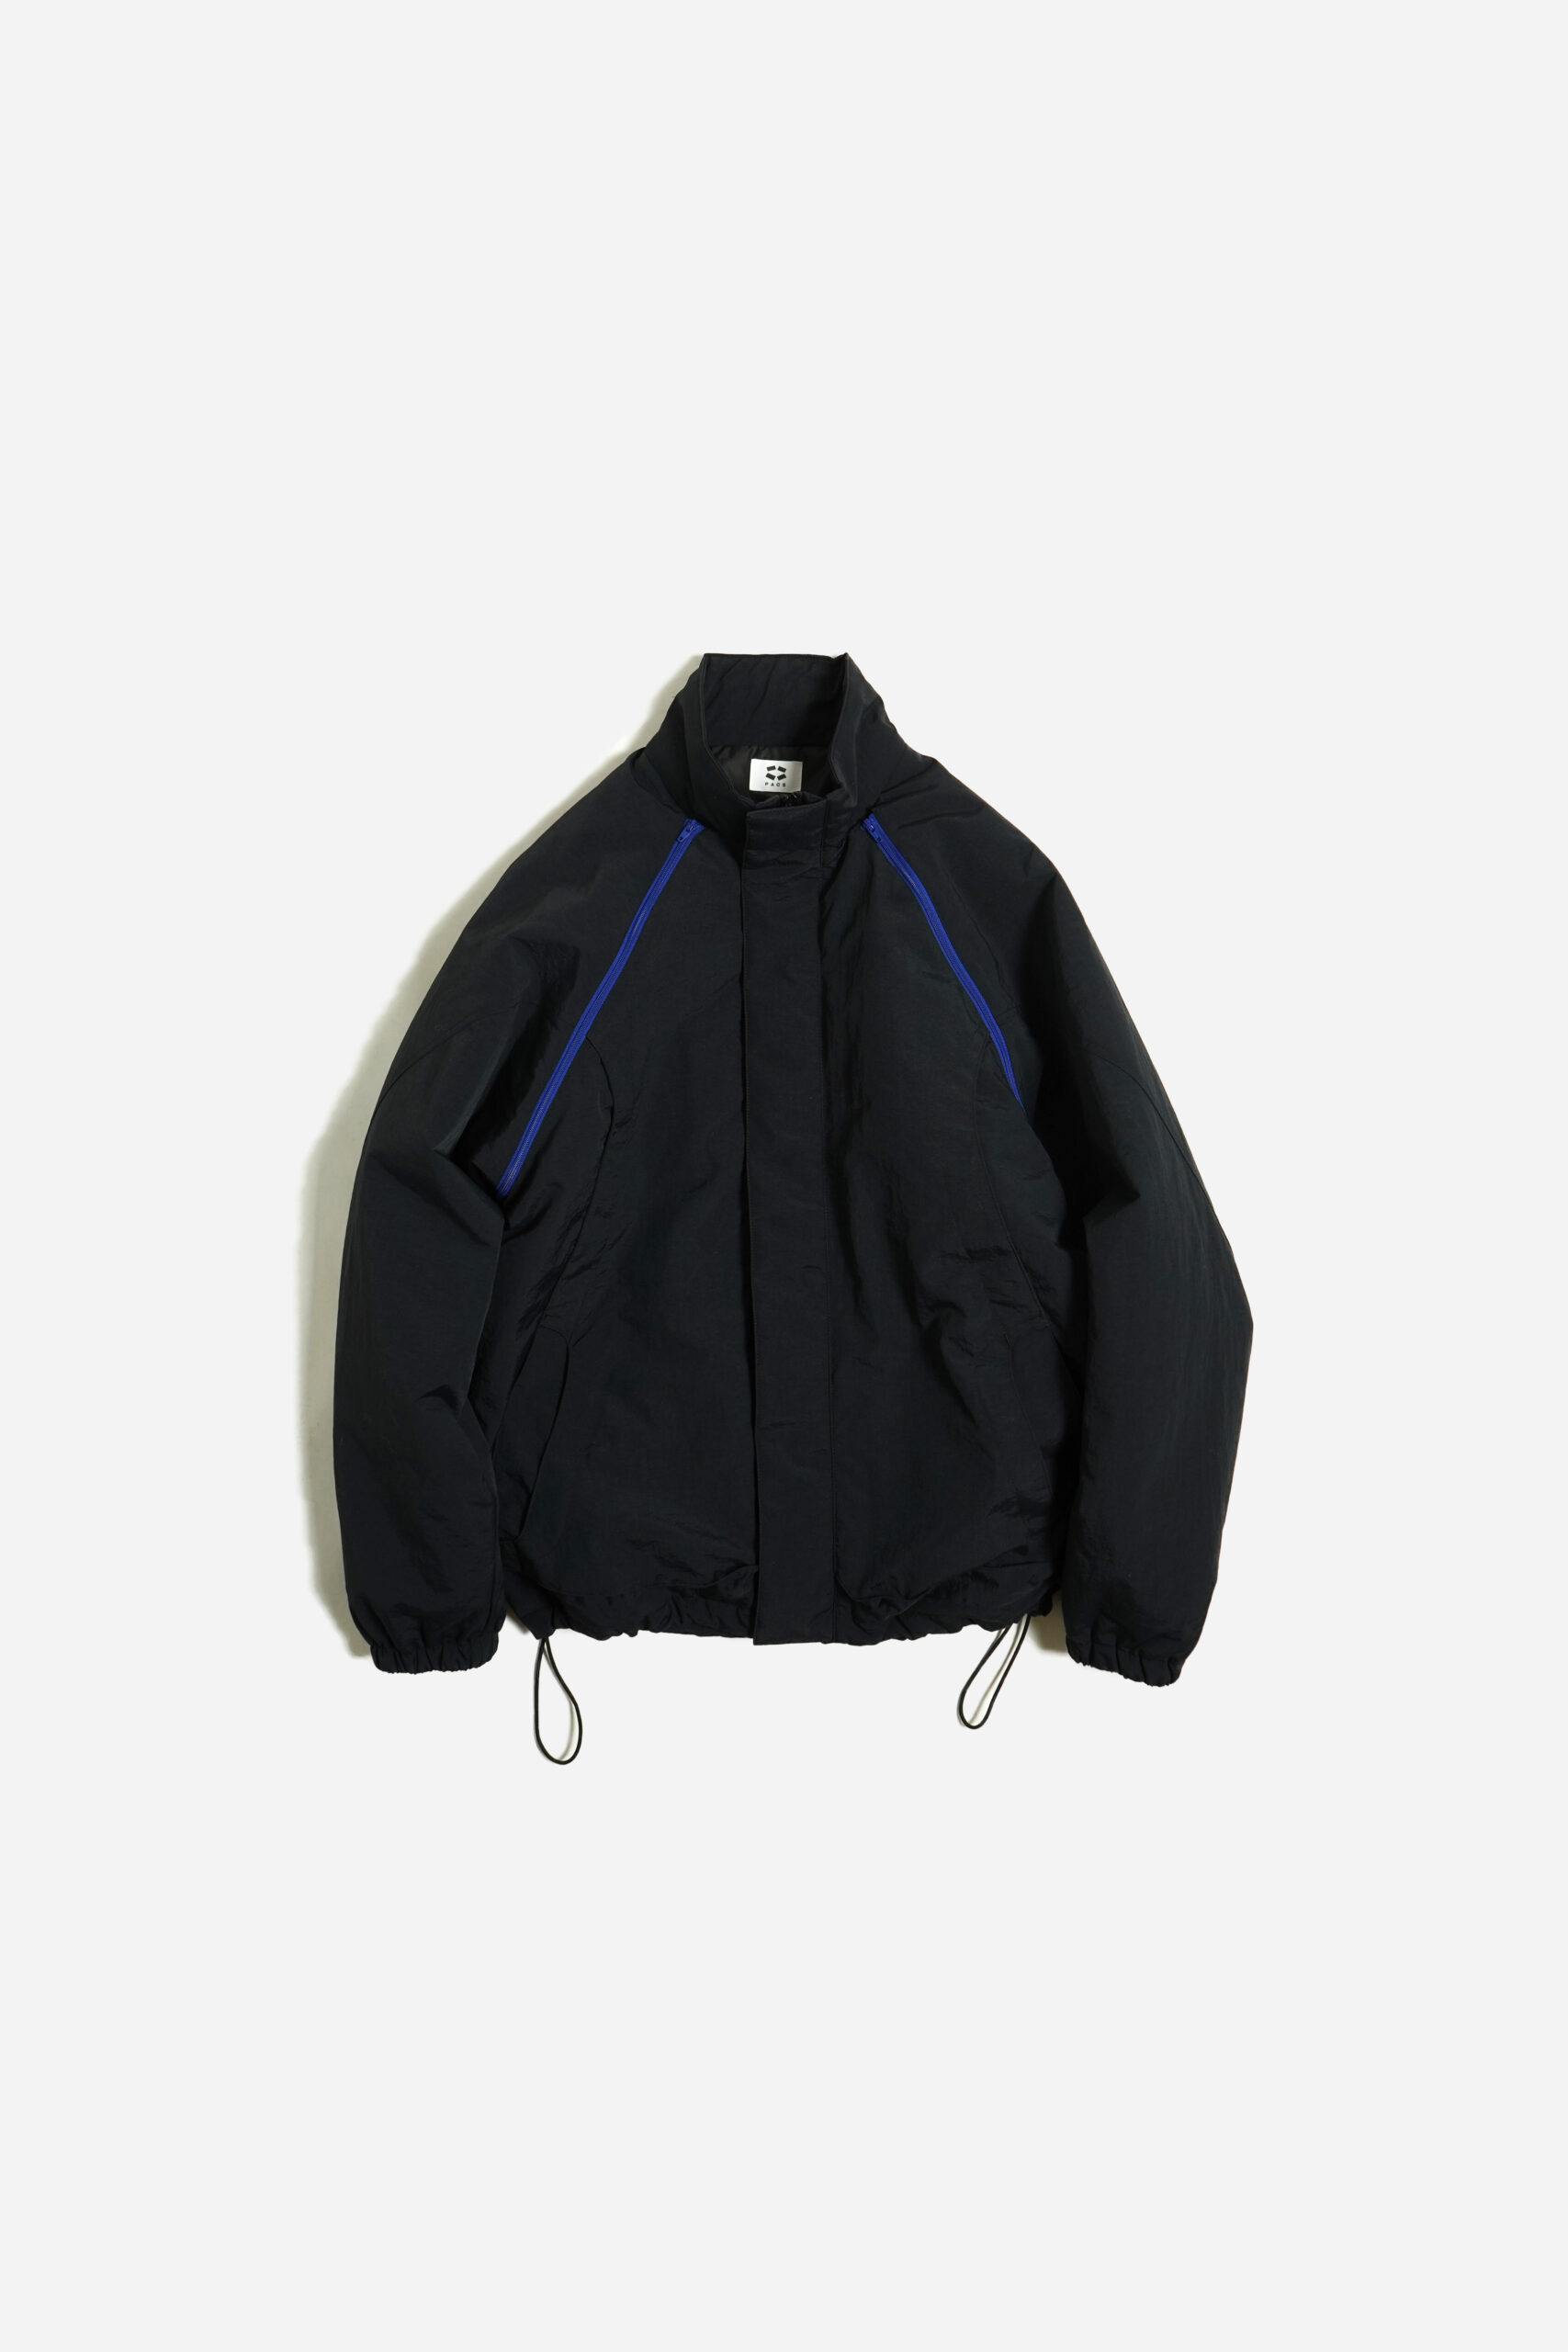 CONVERTIBLE JACKET EXCLUSIVE BLUE LL